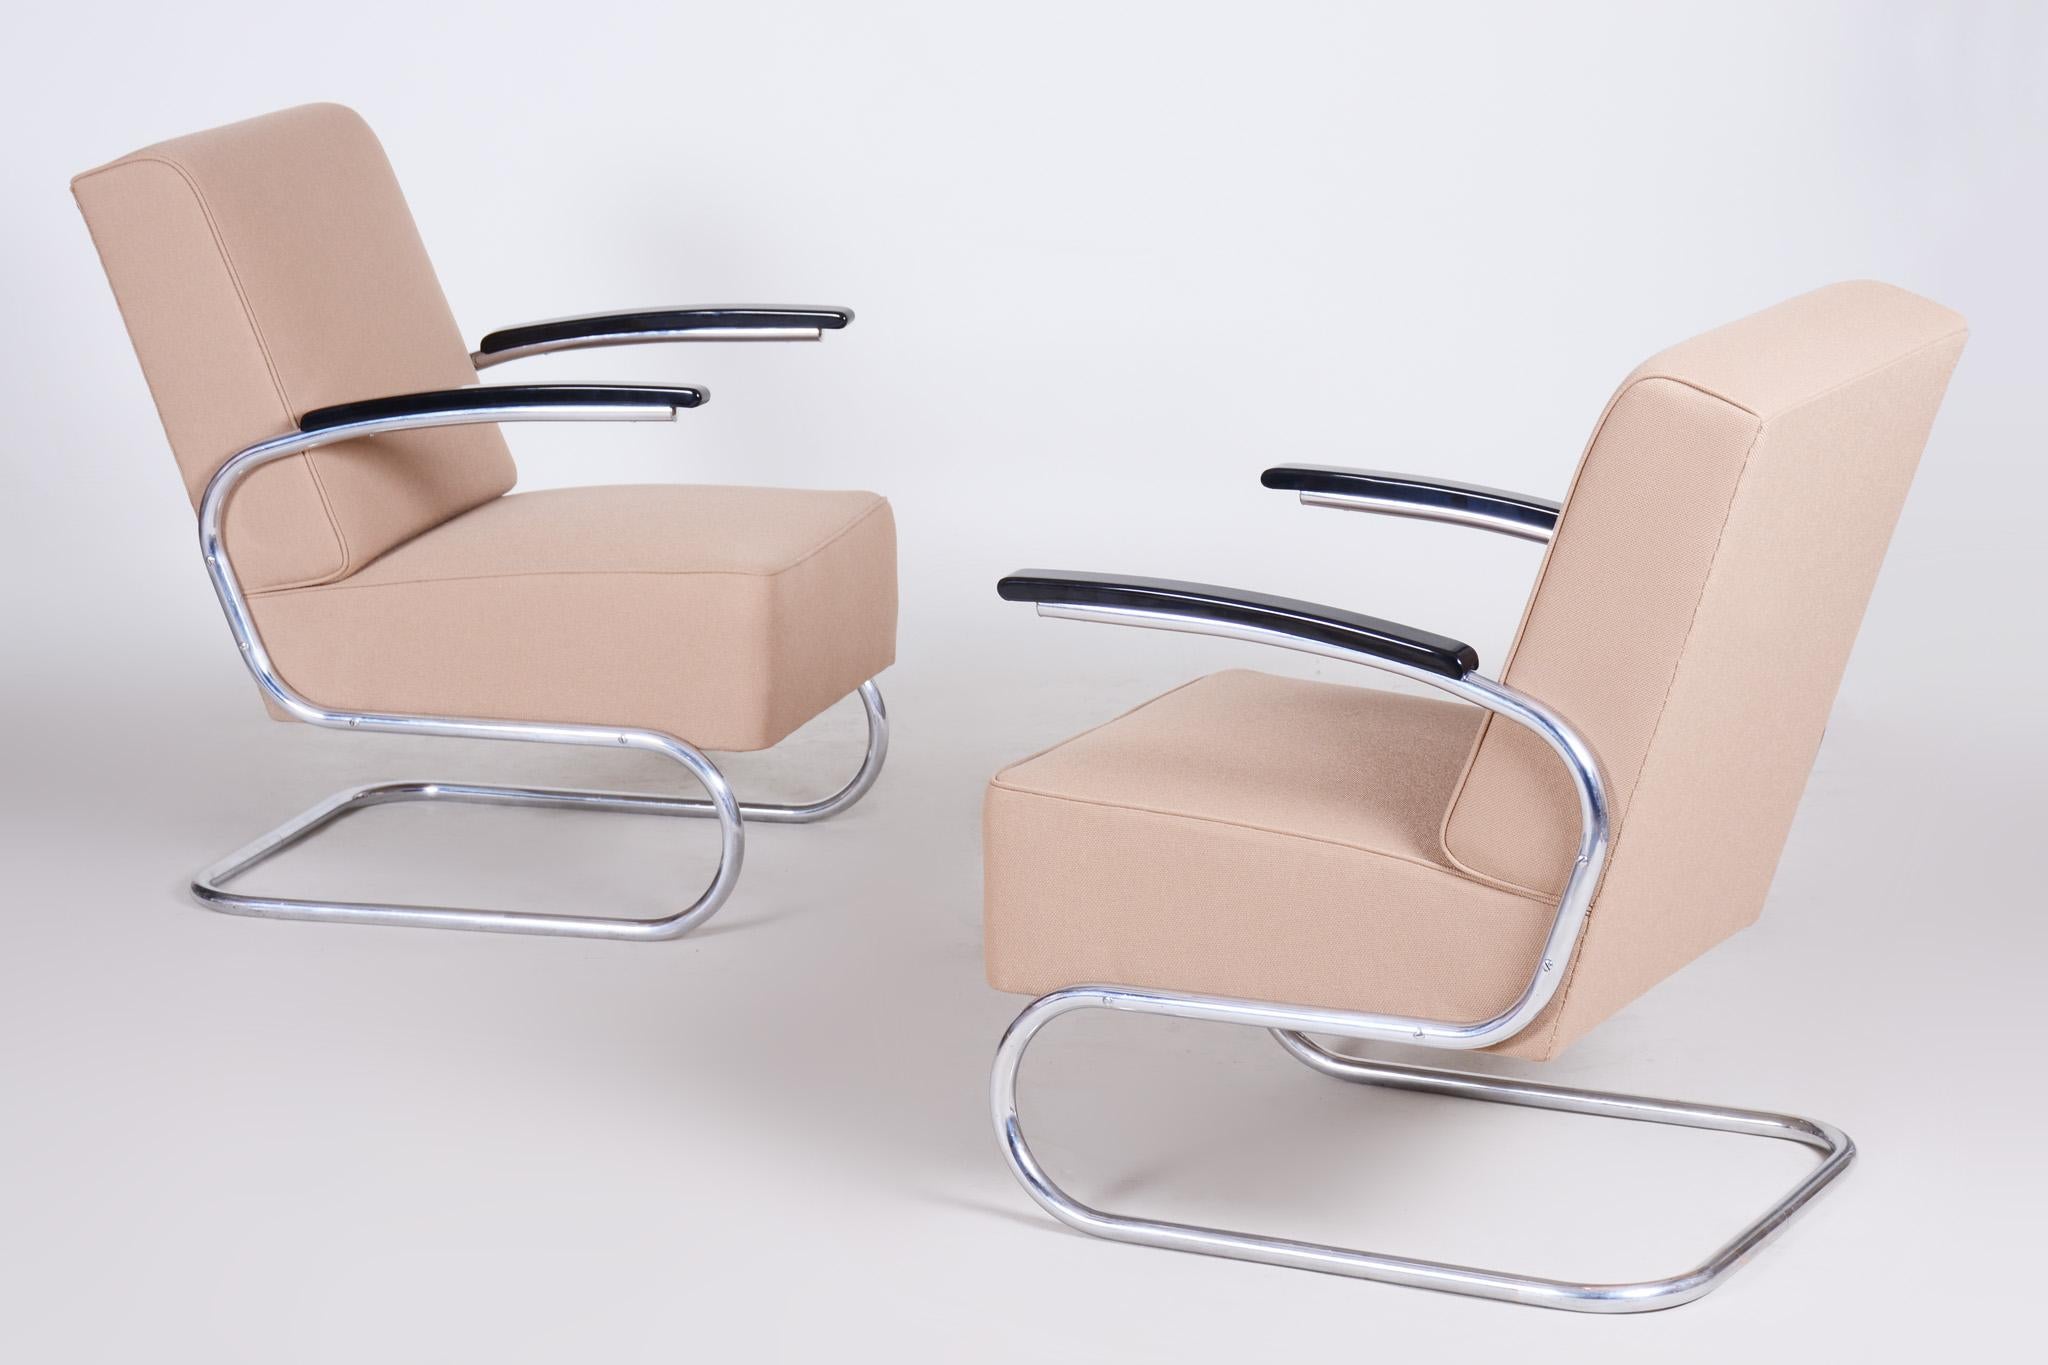 Chrome Bauhaus Armchairs Designed by Mücke Melder, Fully Refurbished, 1930s For Sale 4